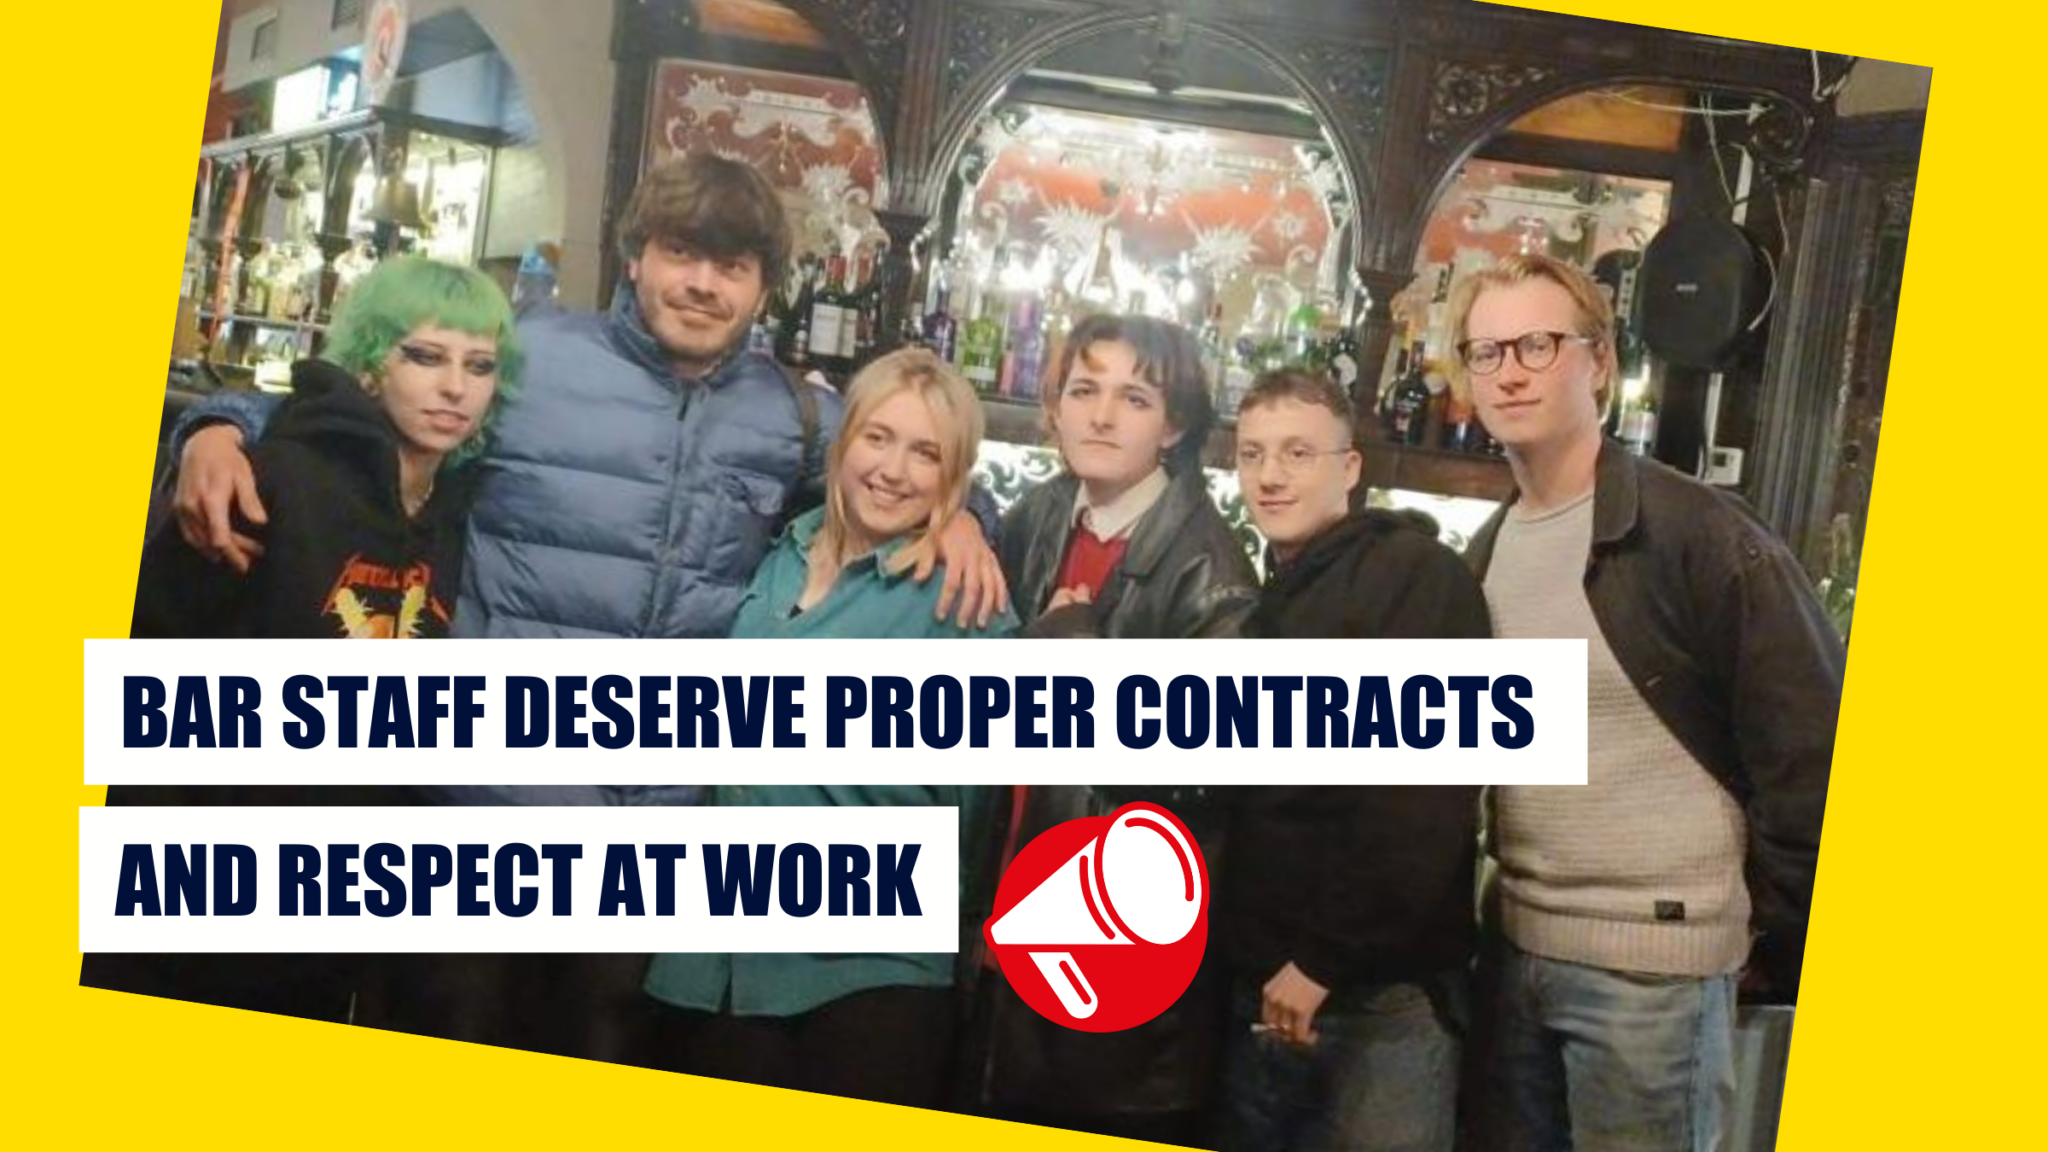 A picture of St James's Tavern bar staff at the bar with the words "BAR STAFF DESERVE PROPER CONTRACTS AND RESPECT AT WORK" over the top